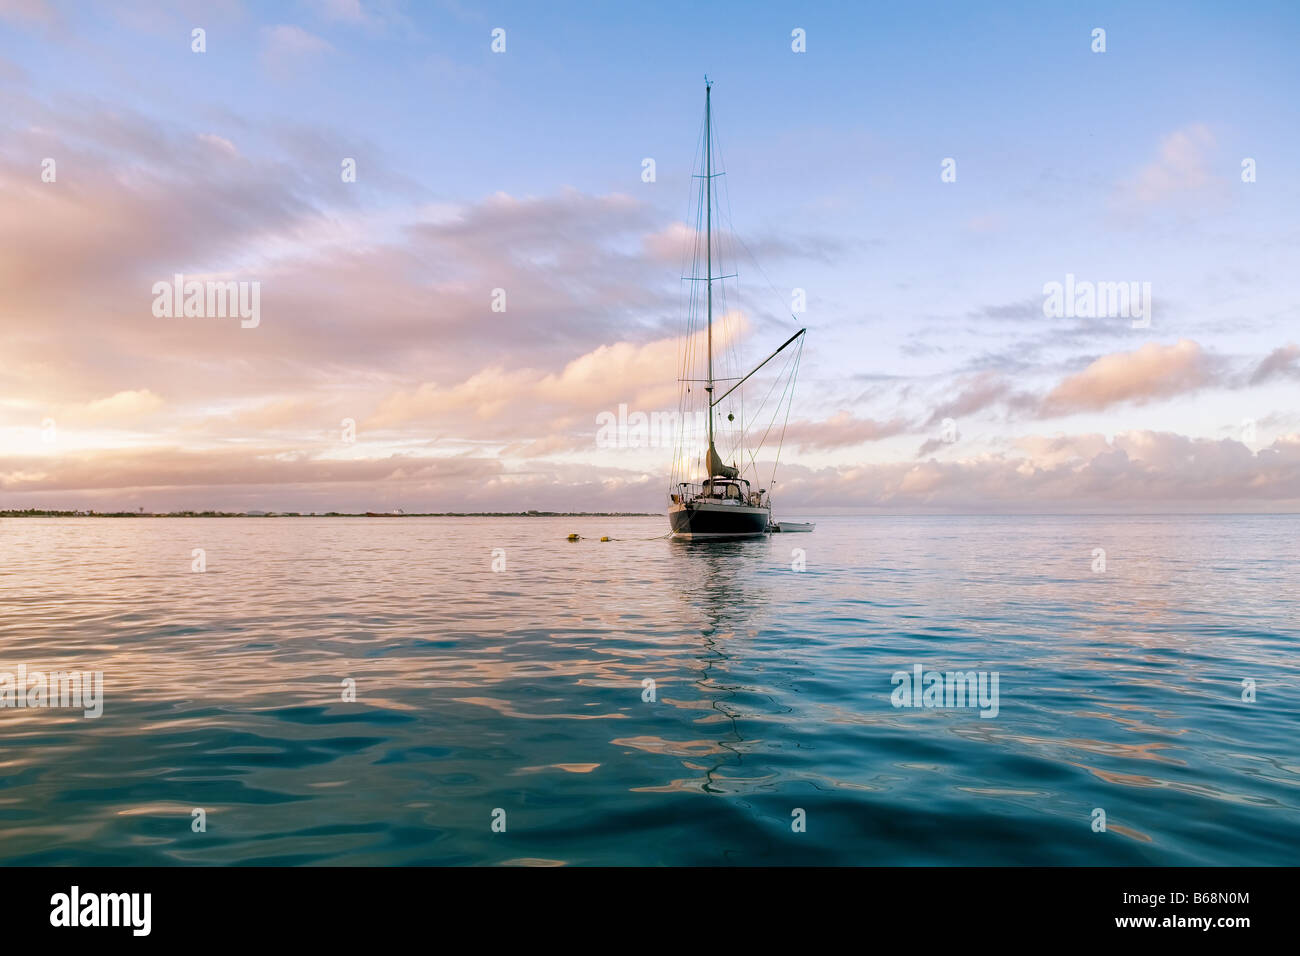 acht in a marine in Caribbean sea Morning Stock Photo